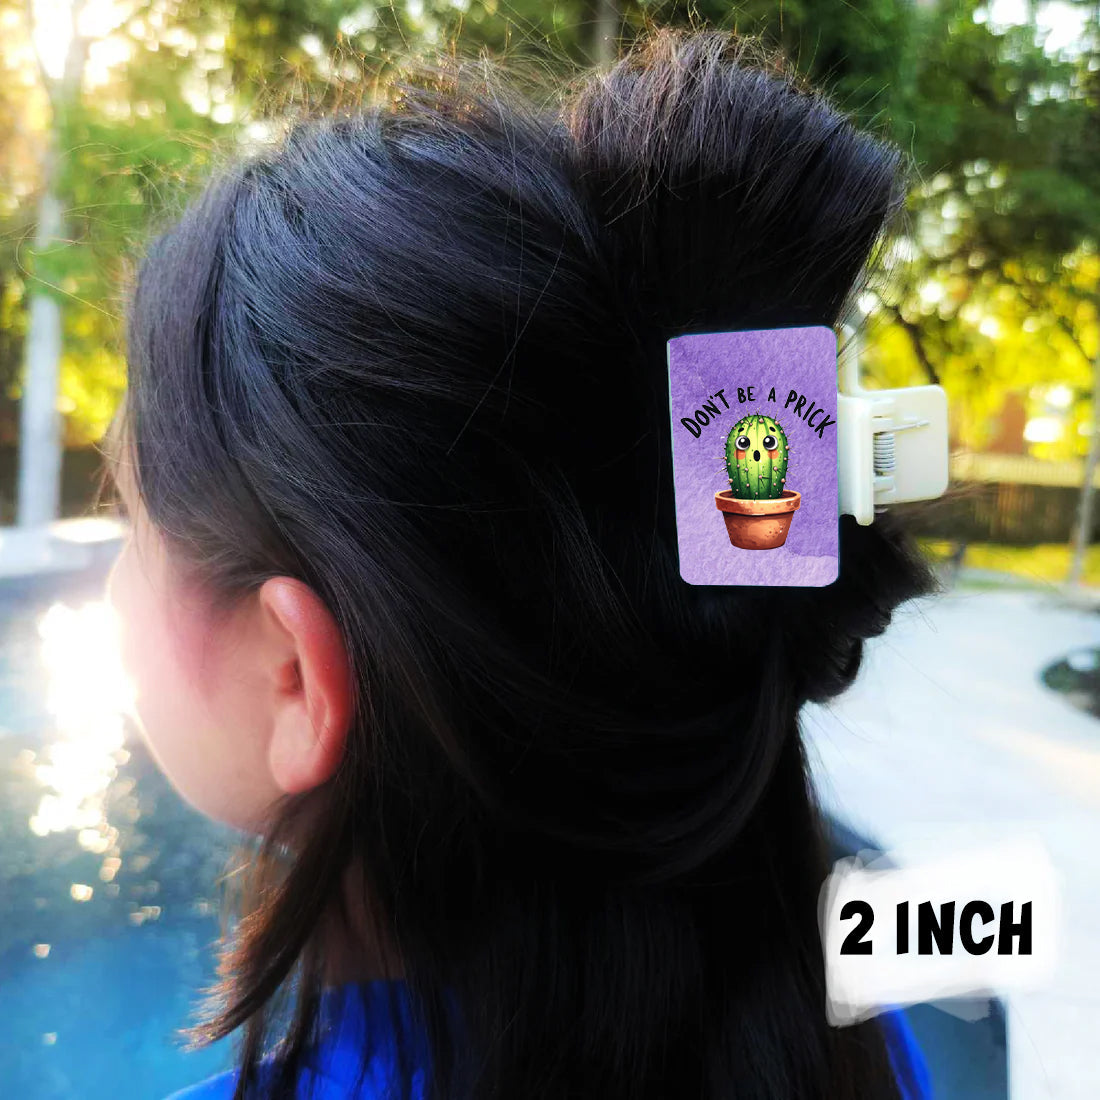 Don't Be a Prick Hair Clip